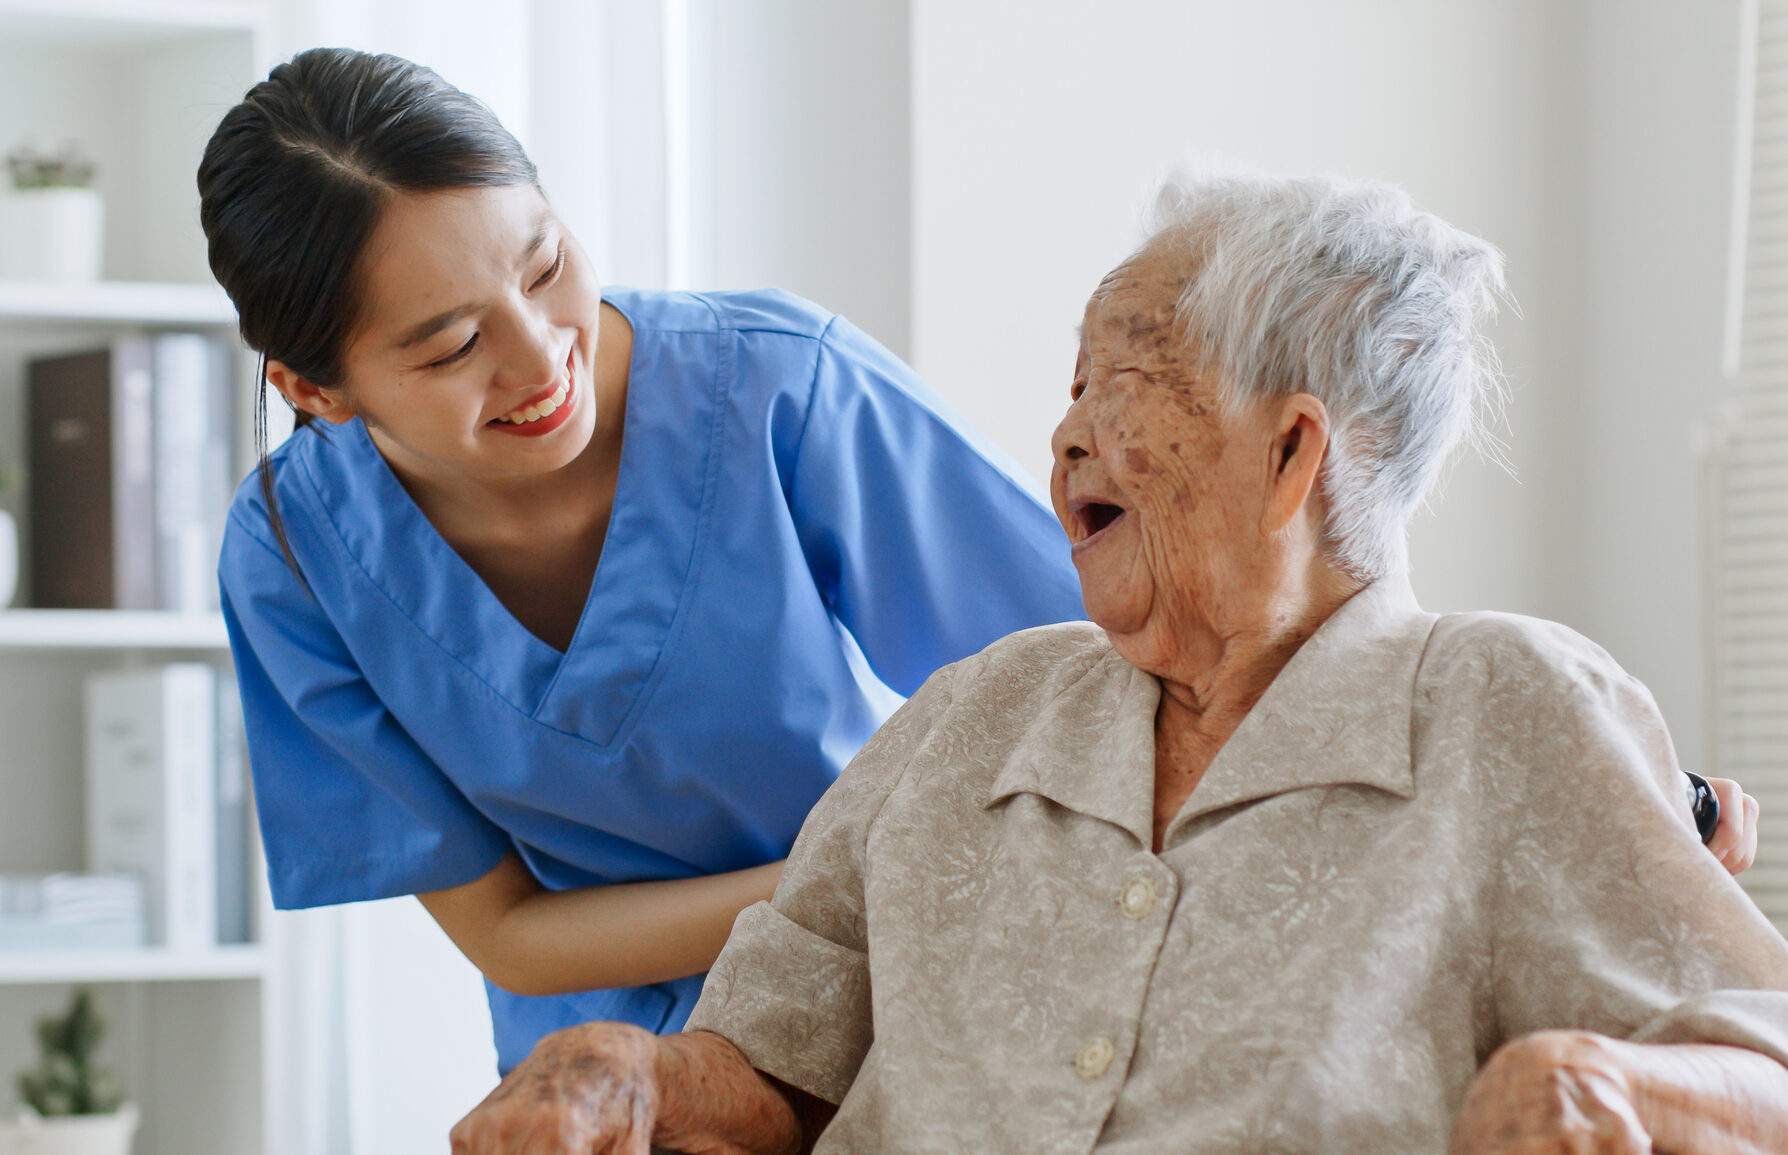 Effective Approaches to Caregiving Training